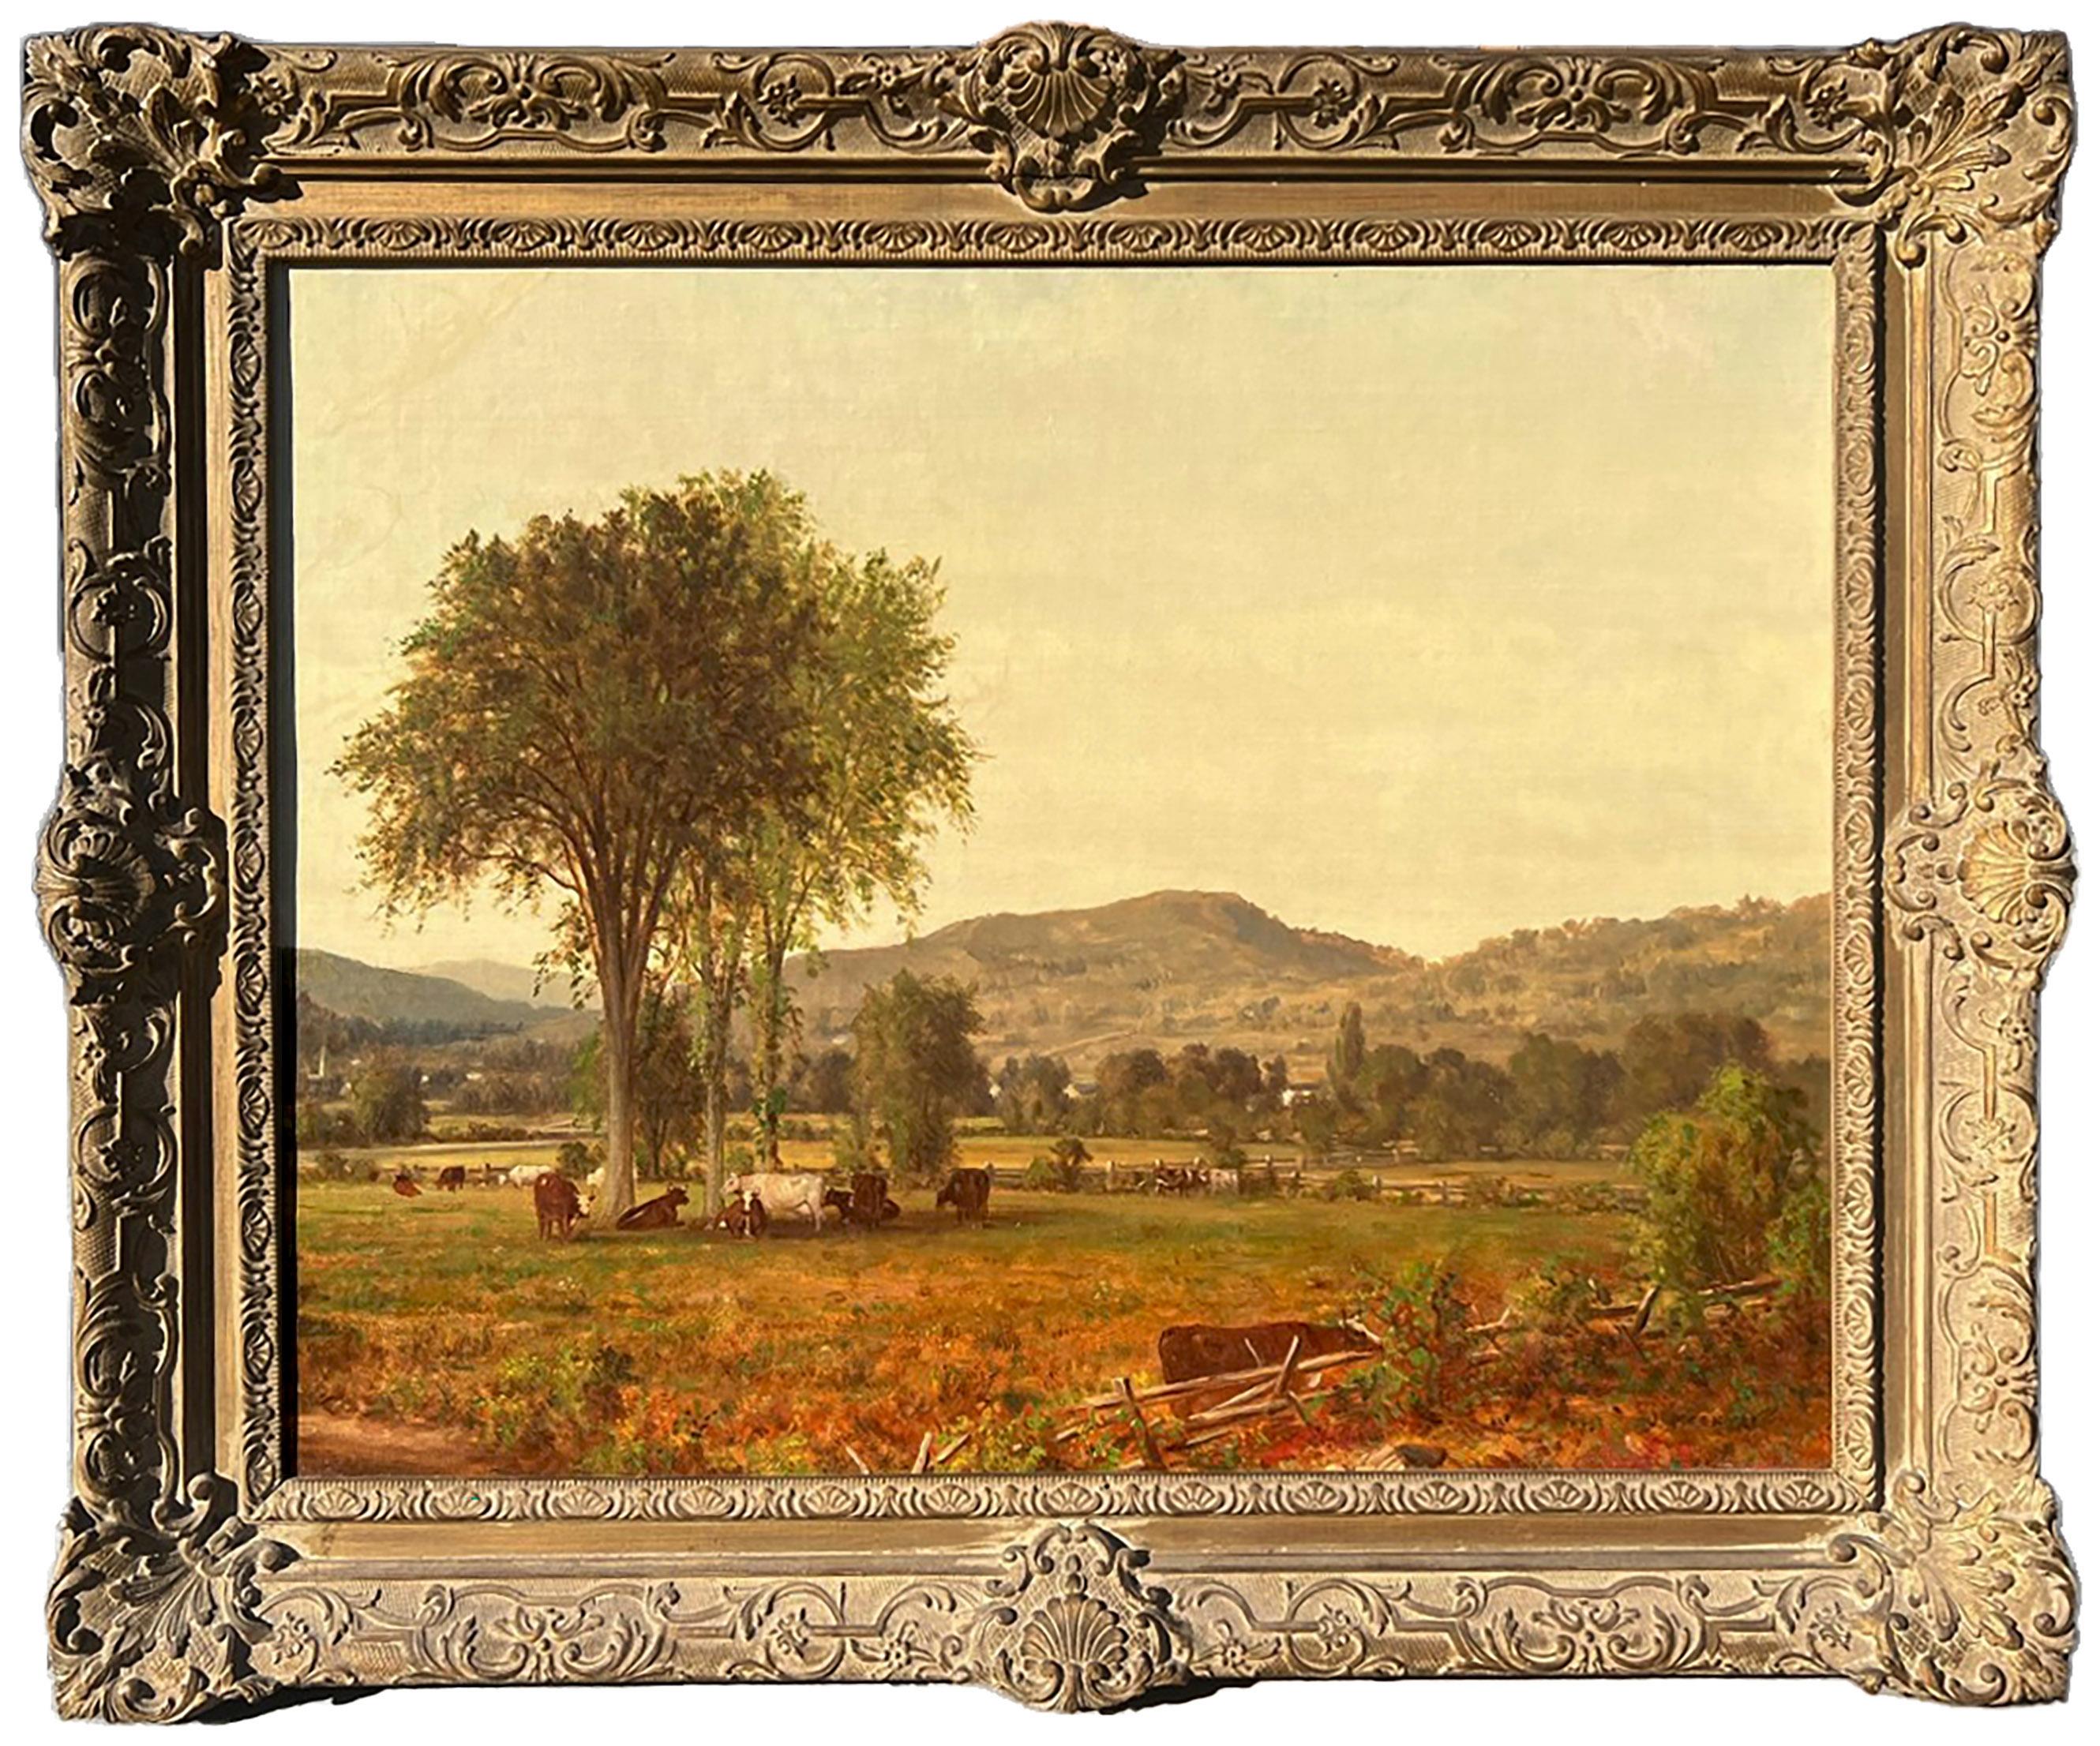 "In the Hudson Valley," by Hudson River School artist Jervis McEntee (1828-1891) is oil on canvas. The work measures 22 x 28.13 inches and is signed by the artist at the lower right. It is framed in a beautiful, period appropriate frame and ready to